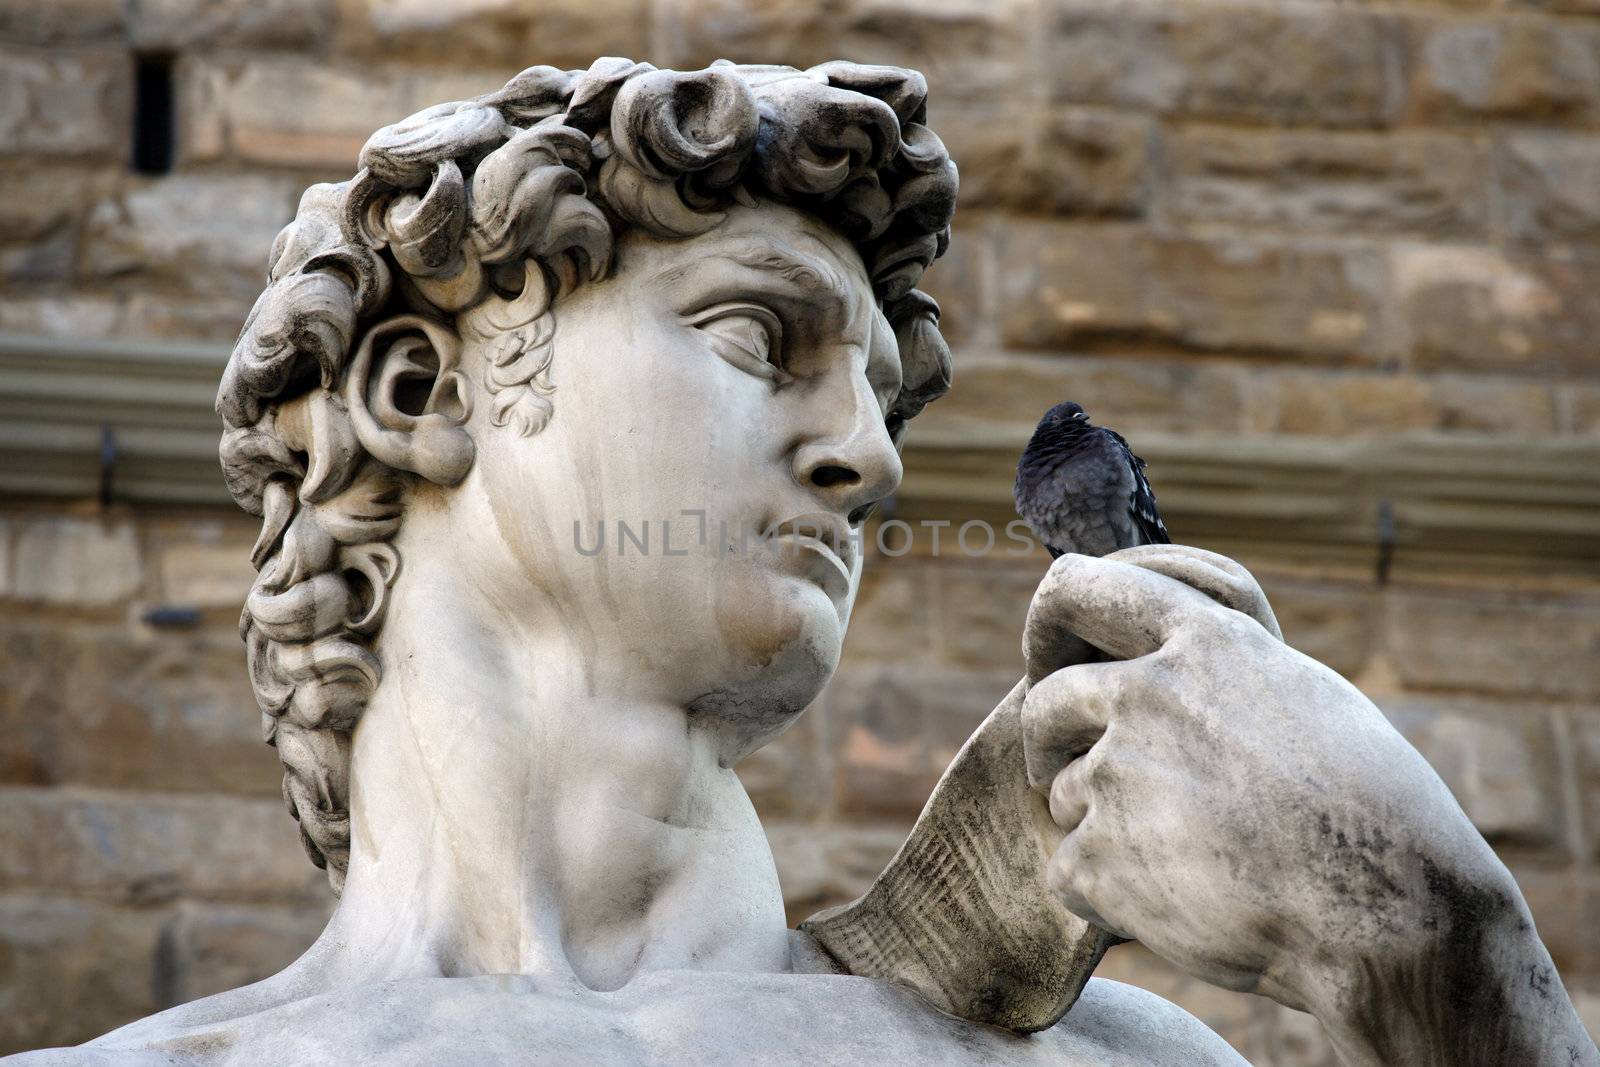 Michelangelo's replica David statue having a conversation with a pigeon.
